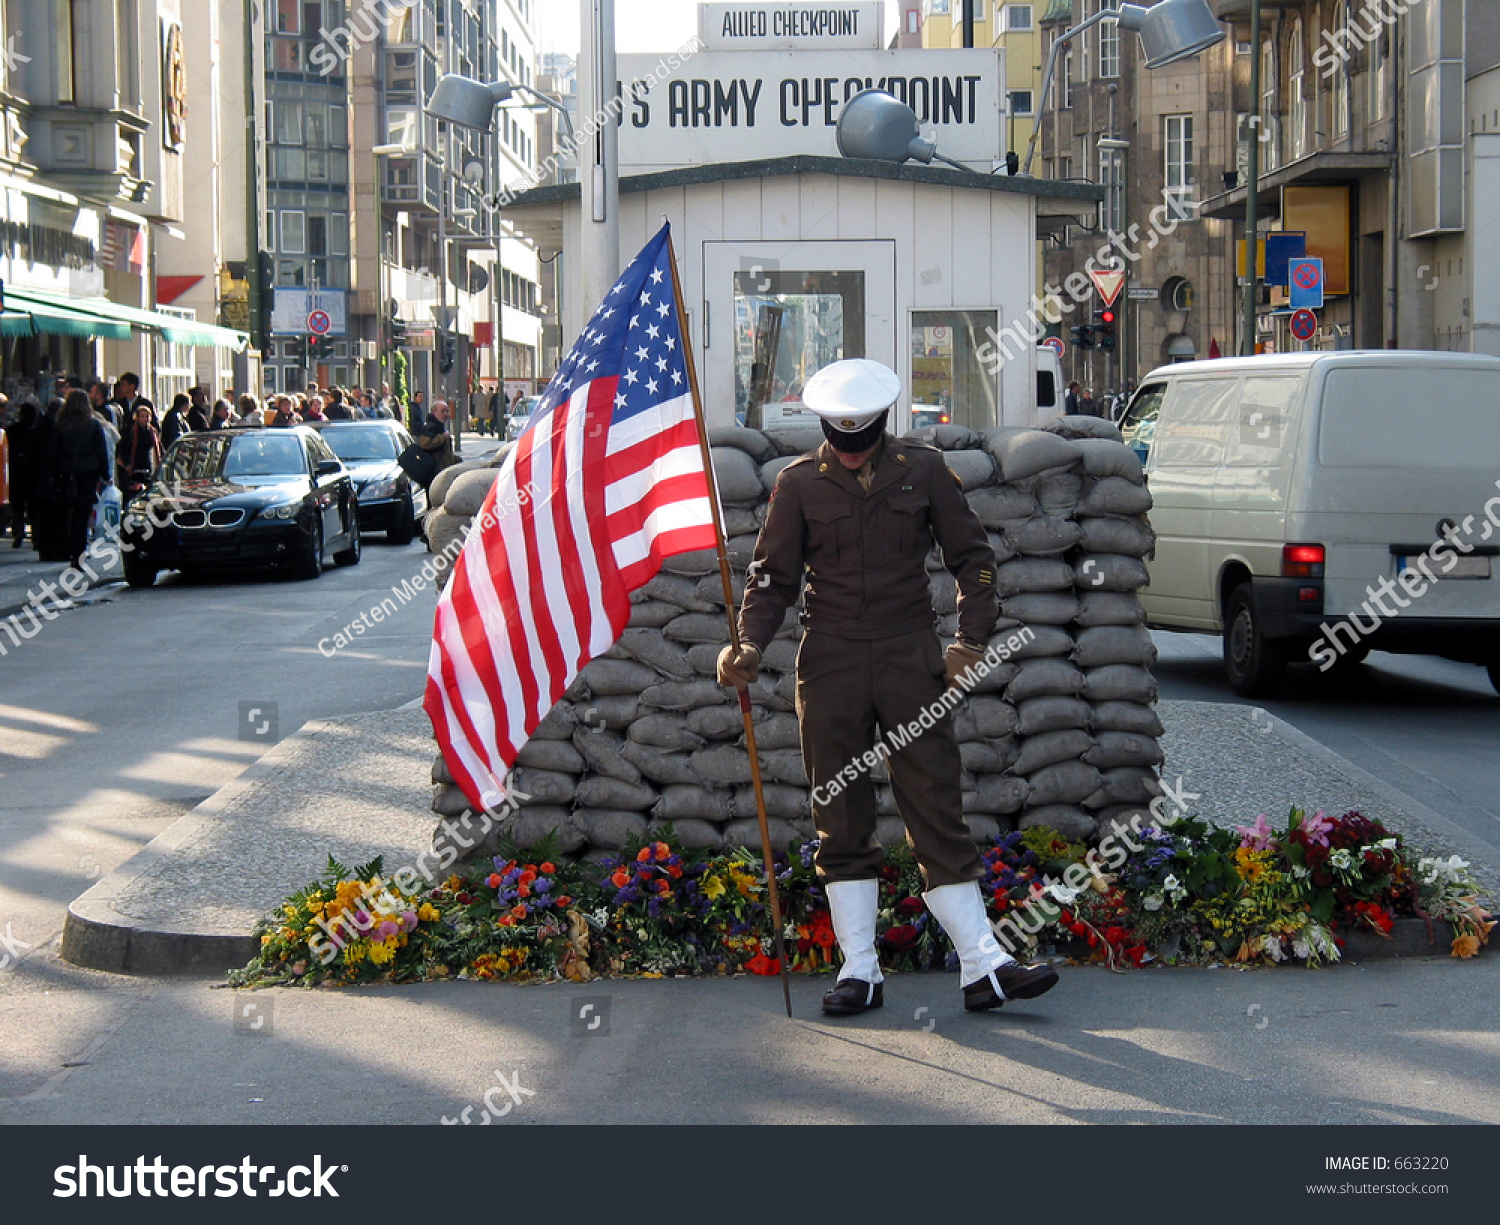 Checkpoint Charlie #663220